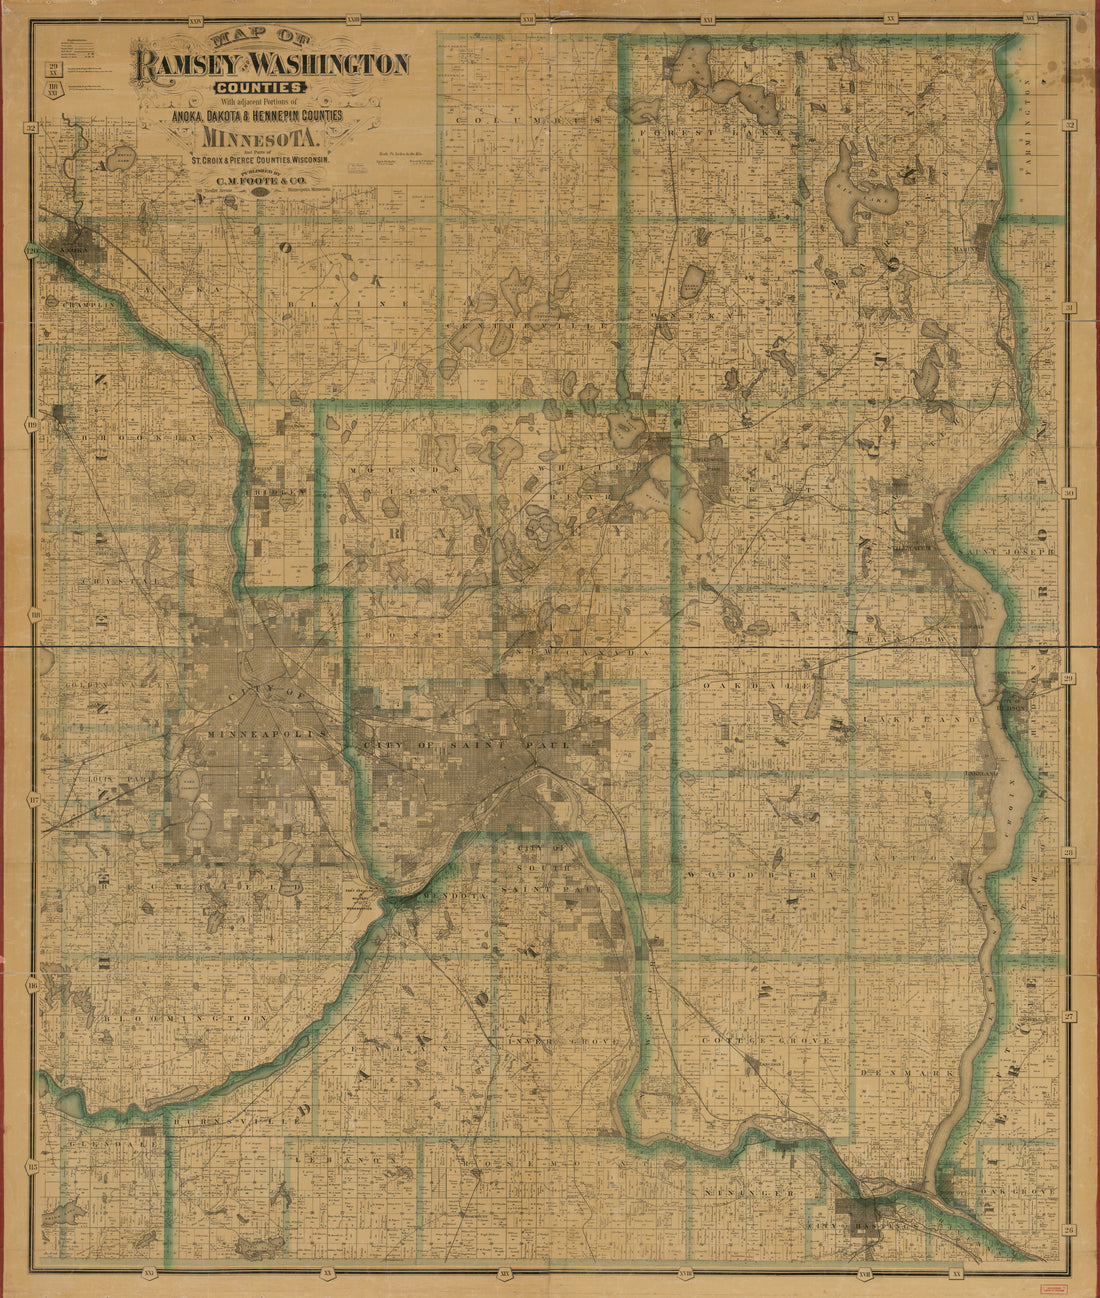 This old map of Map of Ramsey and Washington Counties : With Adjacent Portions of Anoka, Dakota &amp; Hennepin Counties, Minnesota, and Parts of St. Croix &amp; Pierce Counties, Minnesota from 1887 was created by F. (Frederick) Bourquin, Wm. (William) Bracher, M